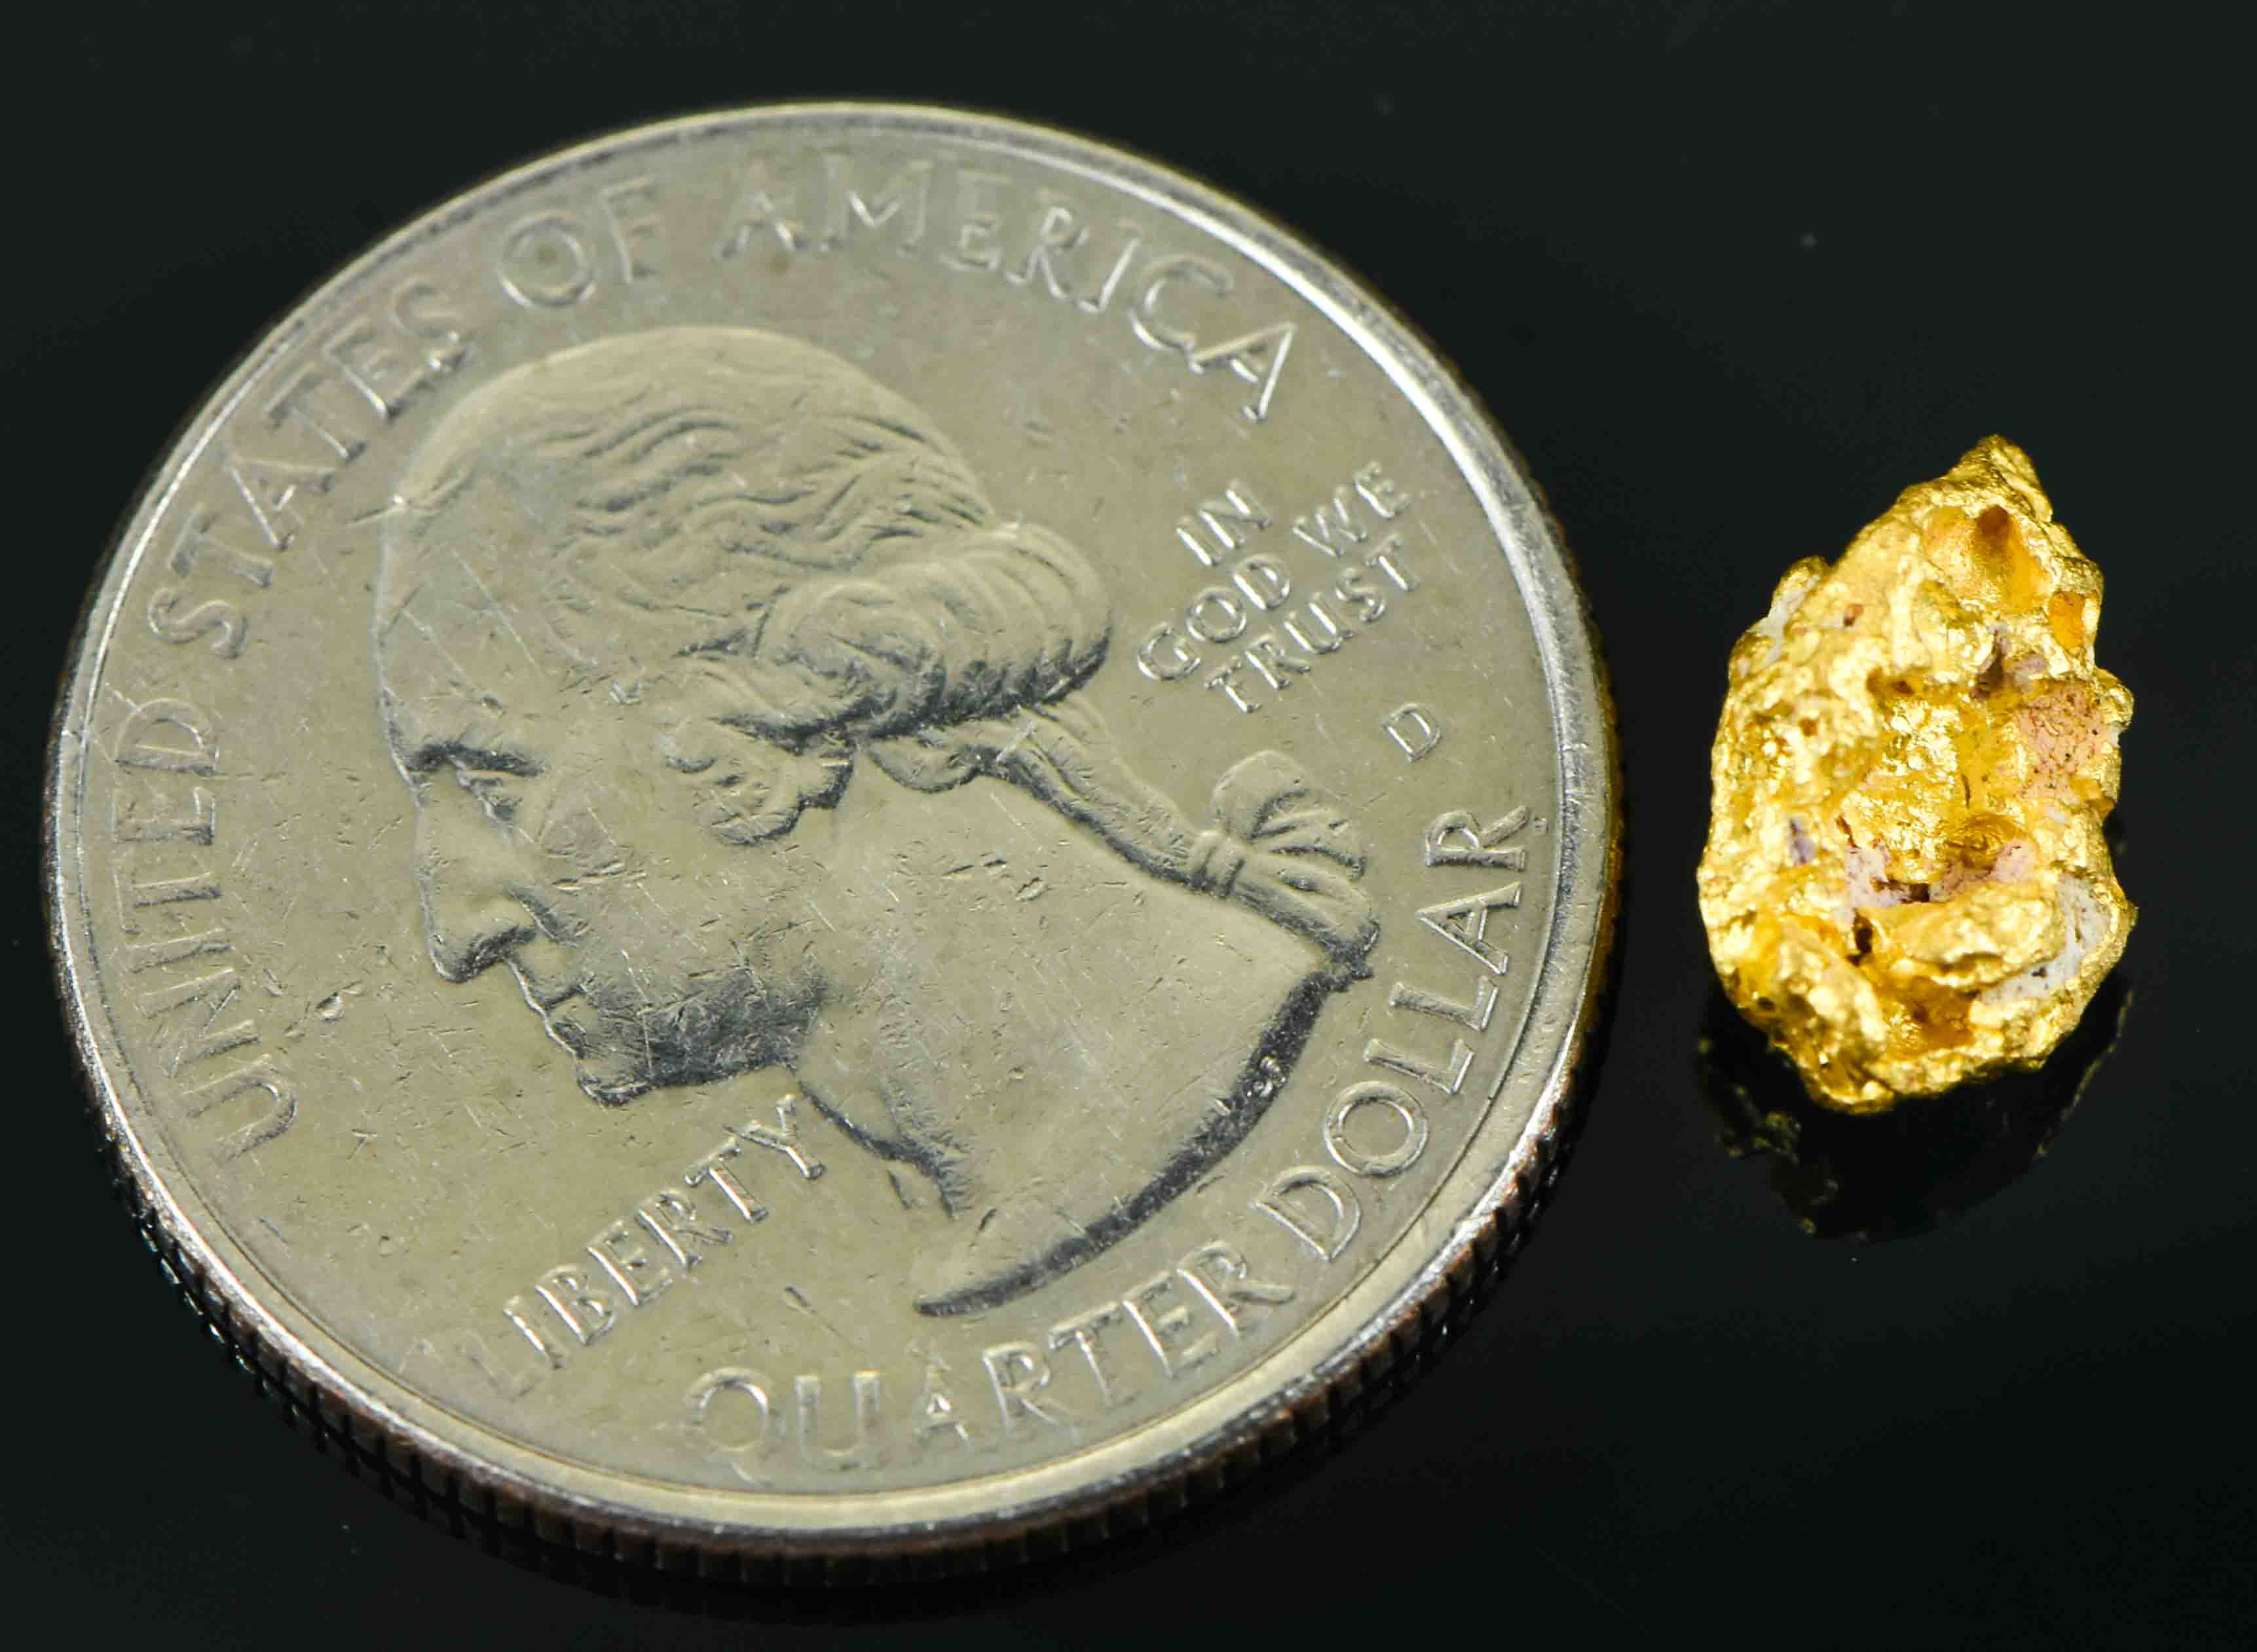 #4 Australian Natural Gold Nugget With Quartz Weighs 1.69 Grams.